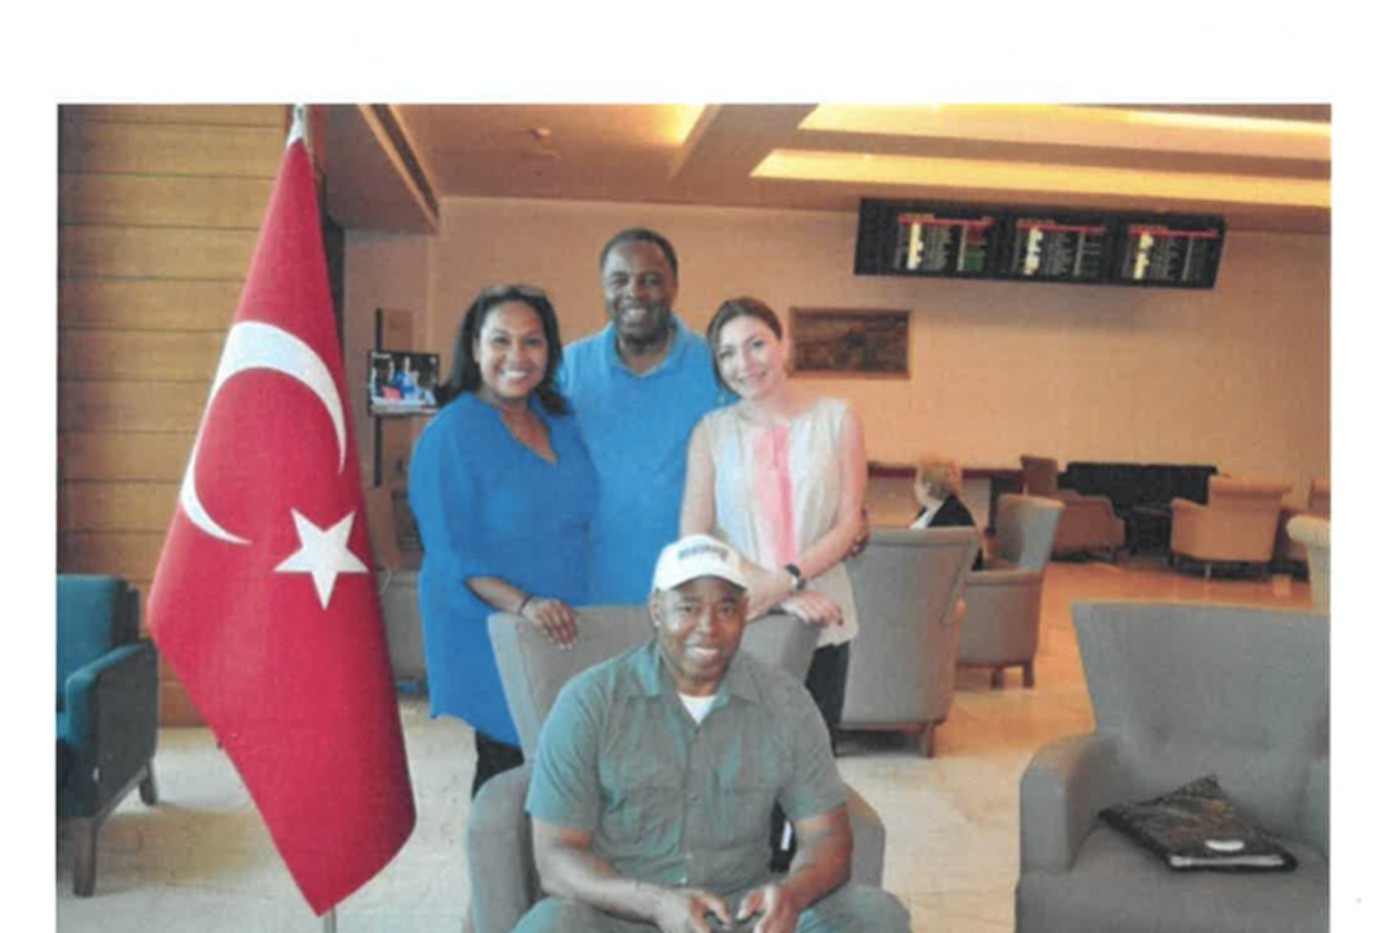 Timothy Pearson poses with then-Brooklyn Borough President Eric Adams during a trip to Turkey in 2015.